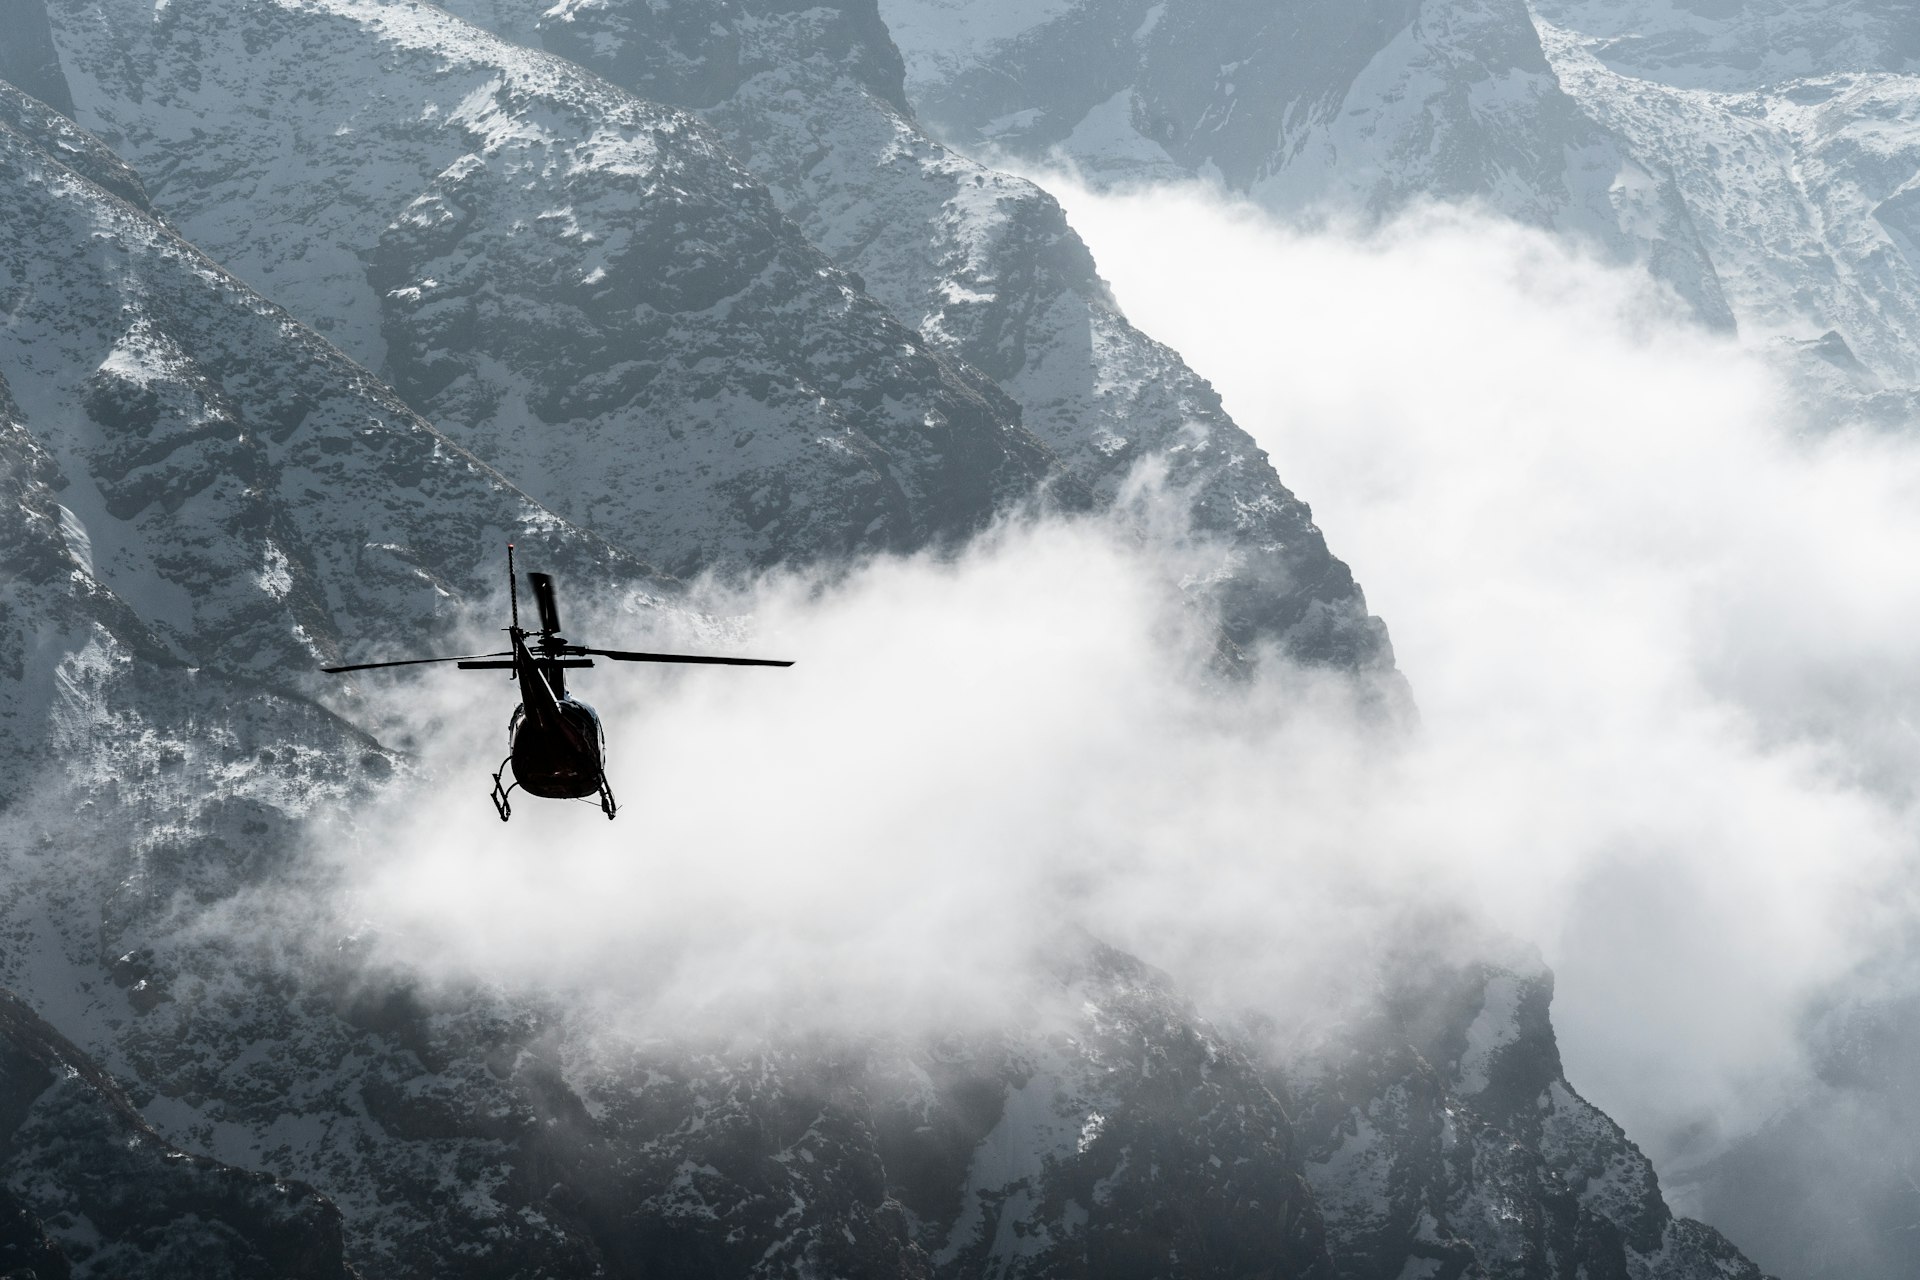 A helicopter flies among low clouds above the Annapurna Himalayas, Nepal